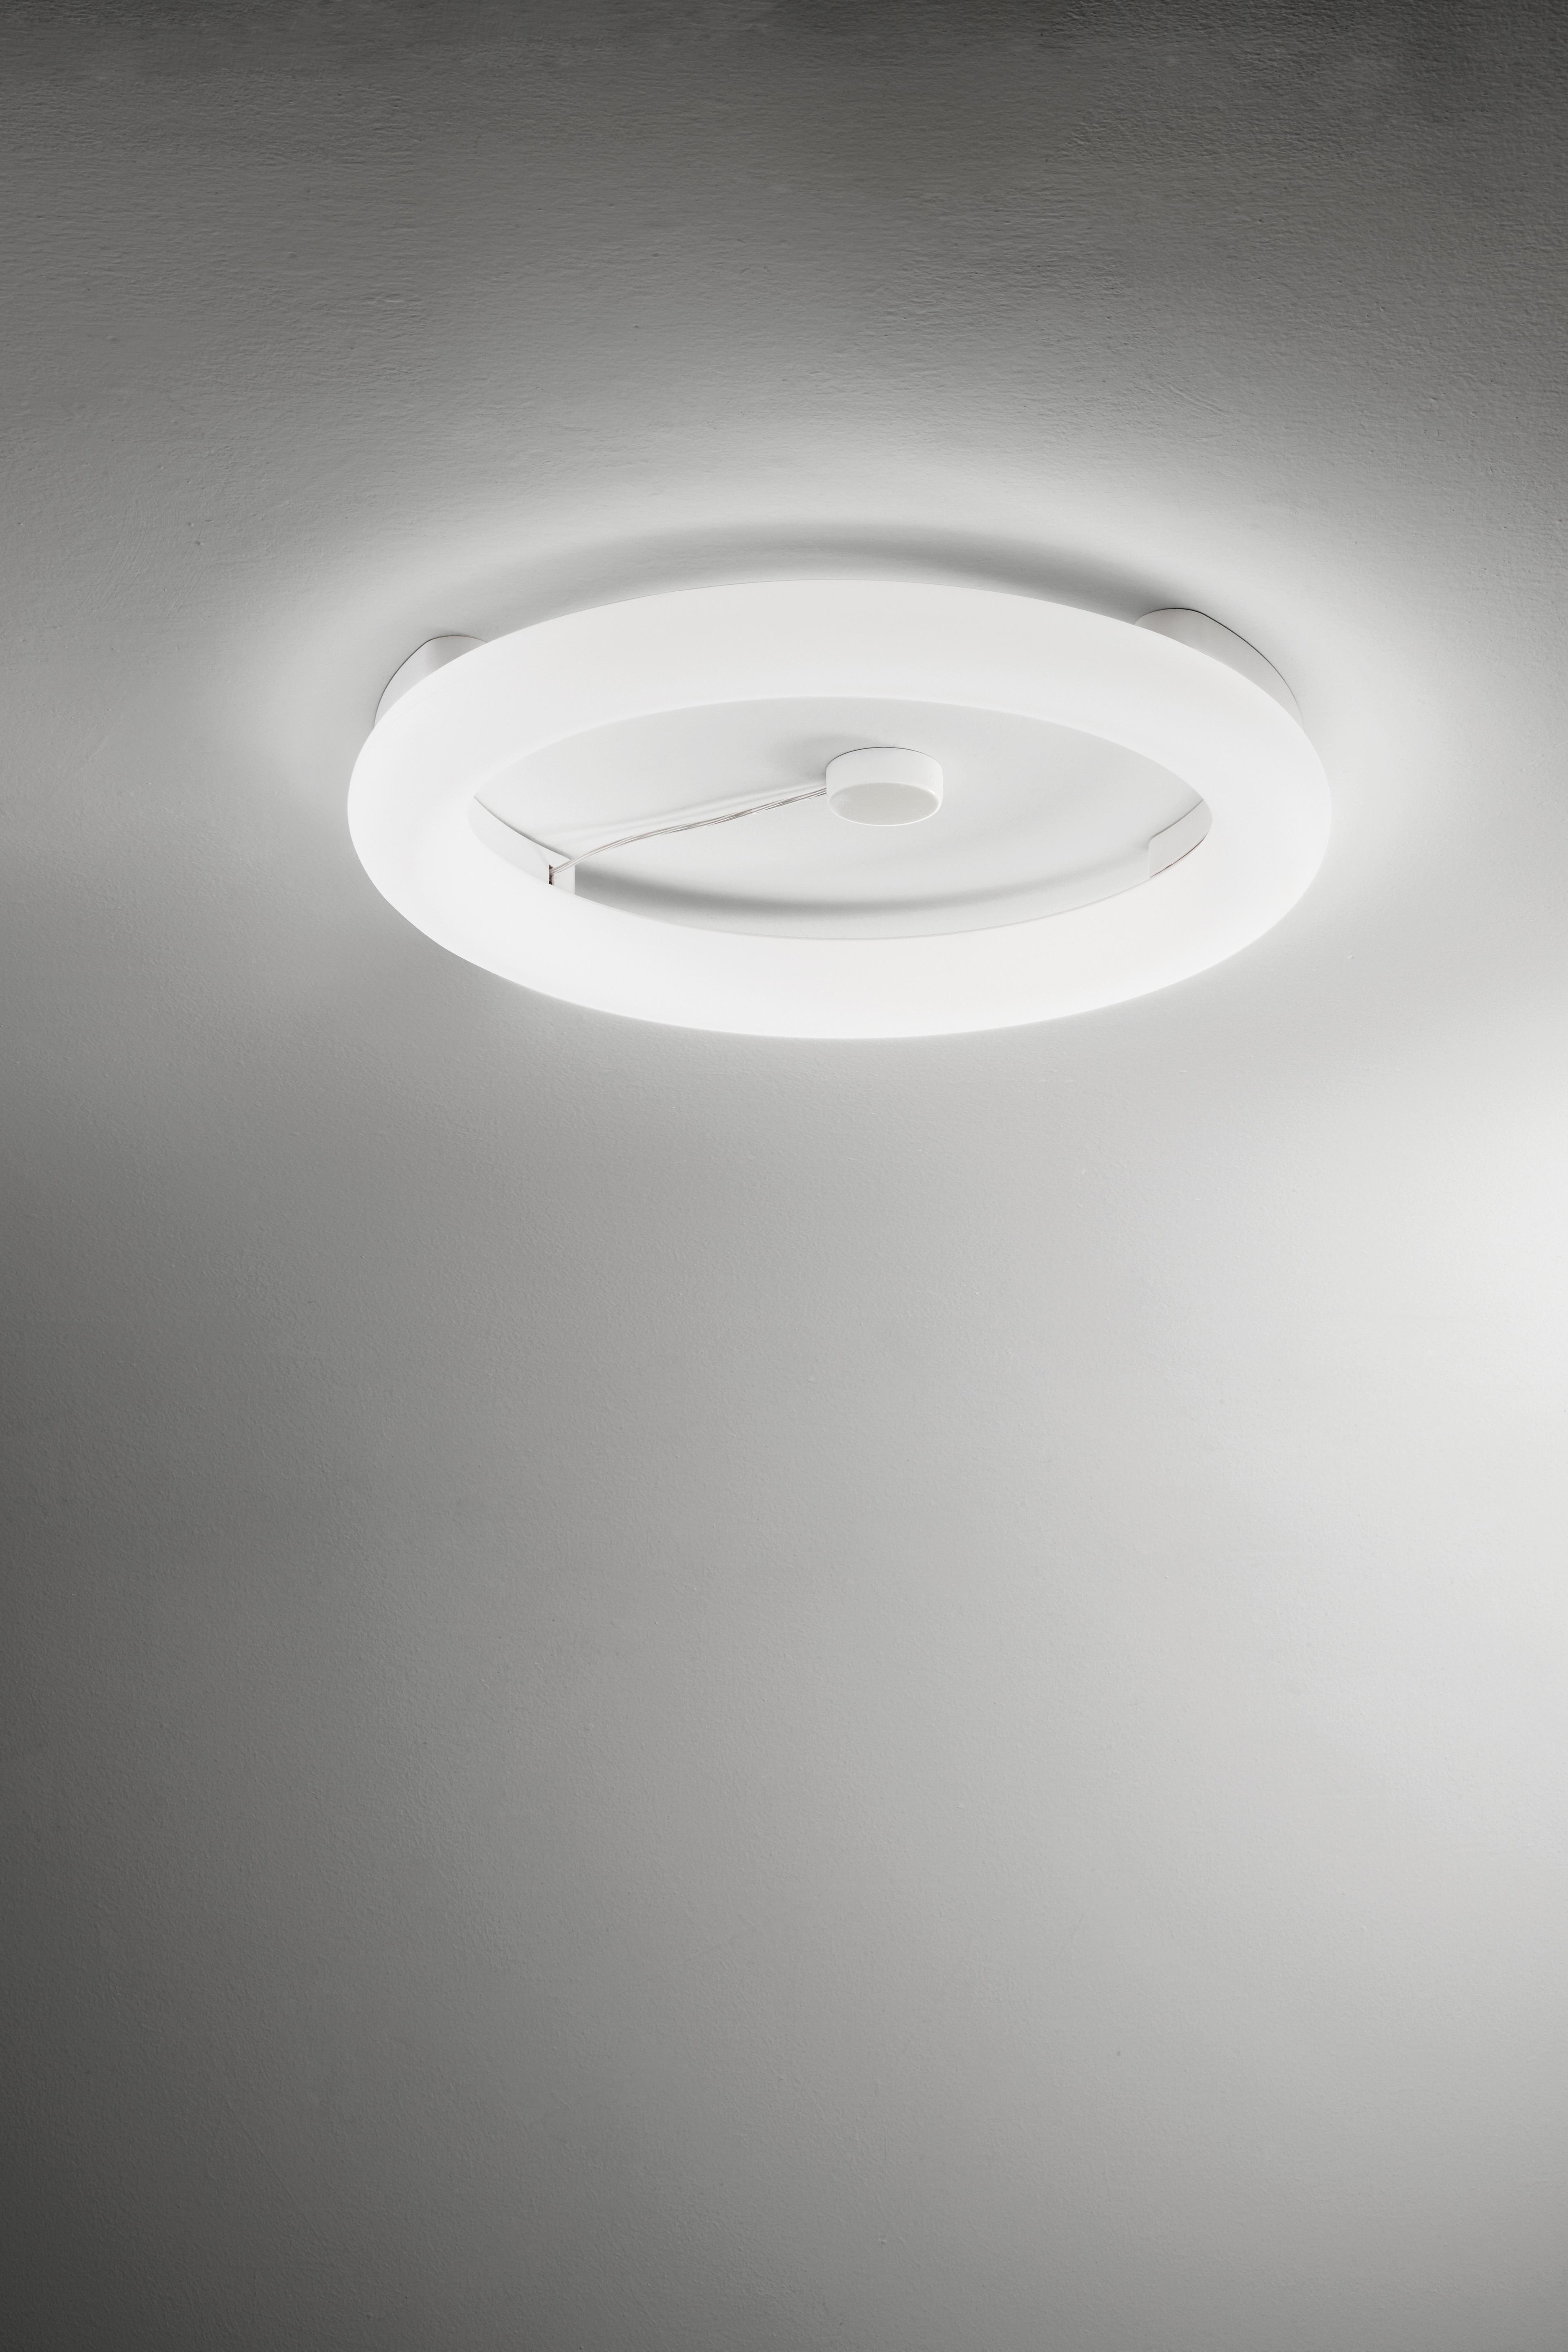 Gallery Product Polo Ceiling Linealightgroup 1280X1920 4